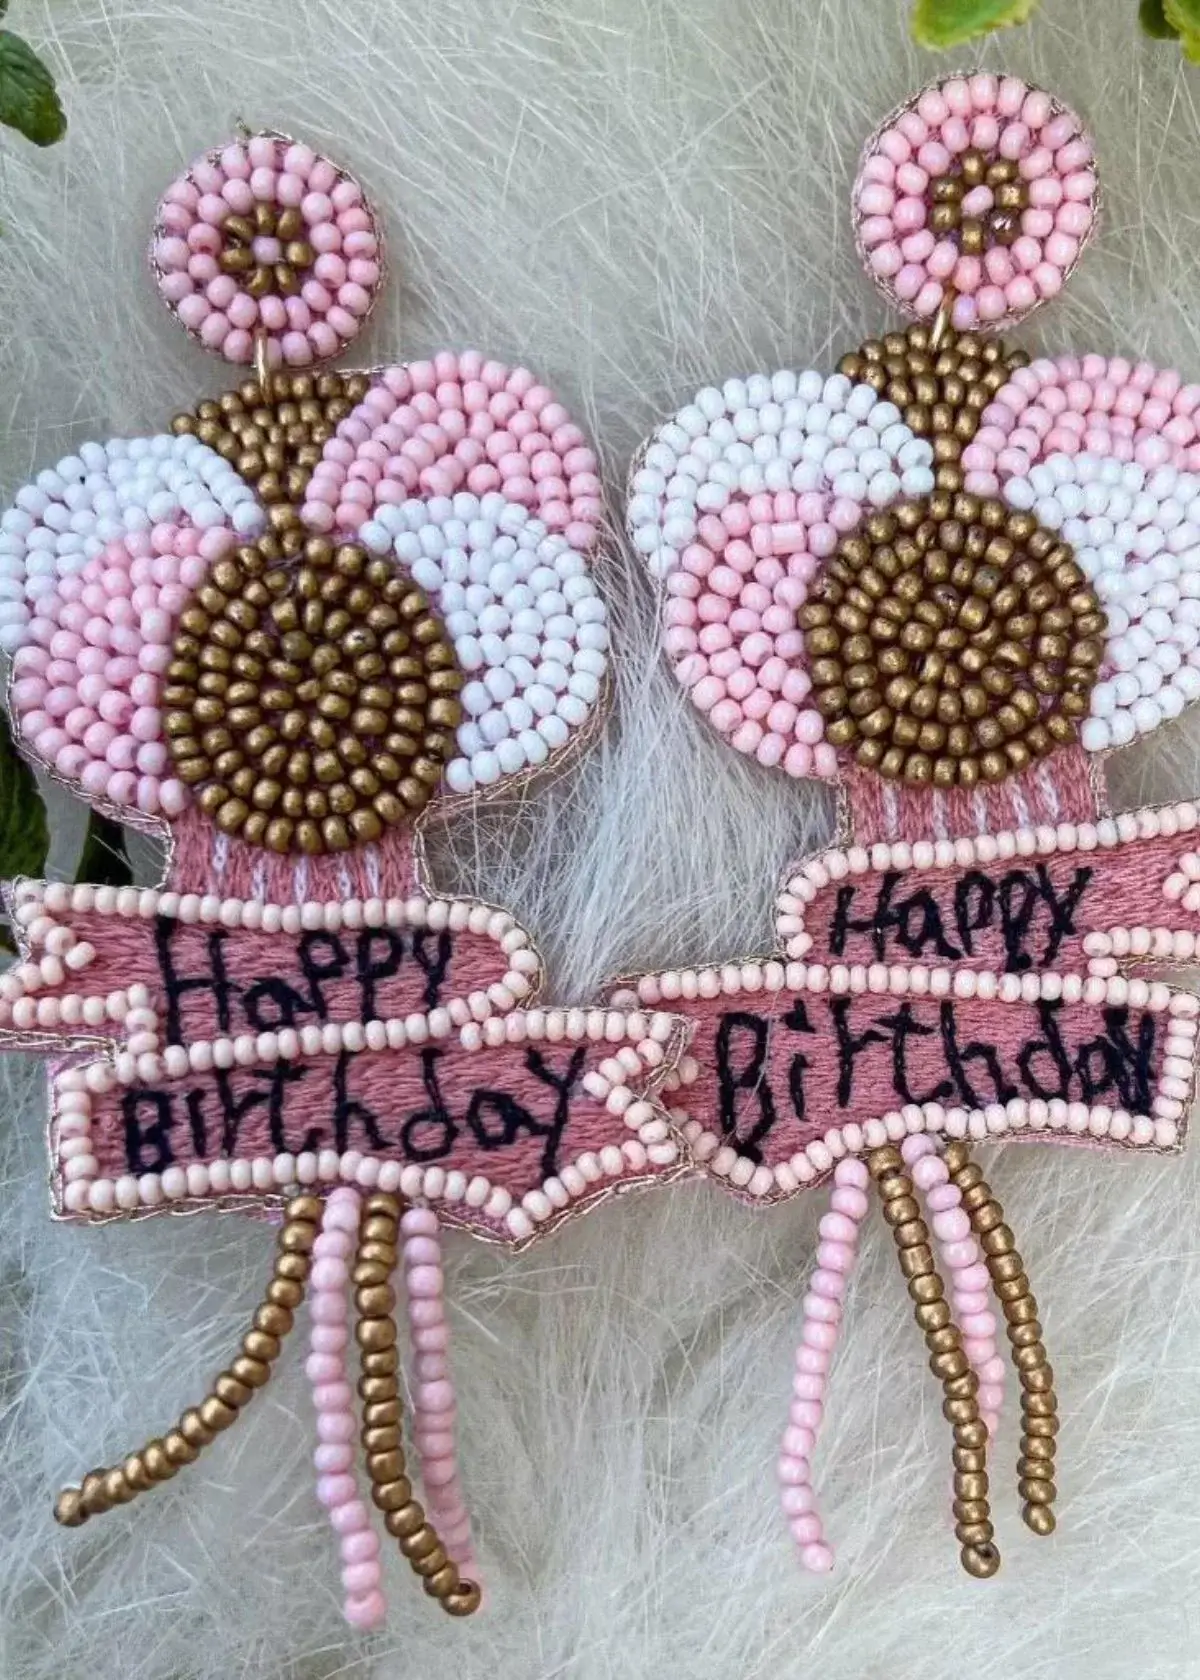 Can I wear Birthday Earrings even If it's not My Birthday?